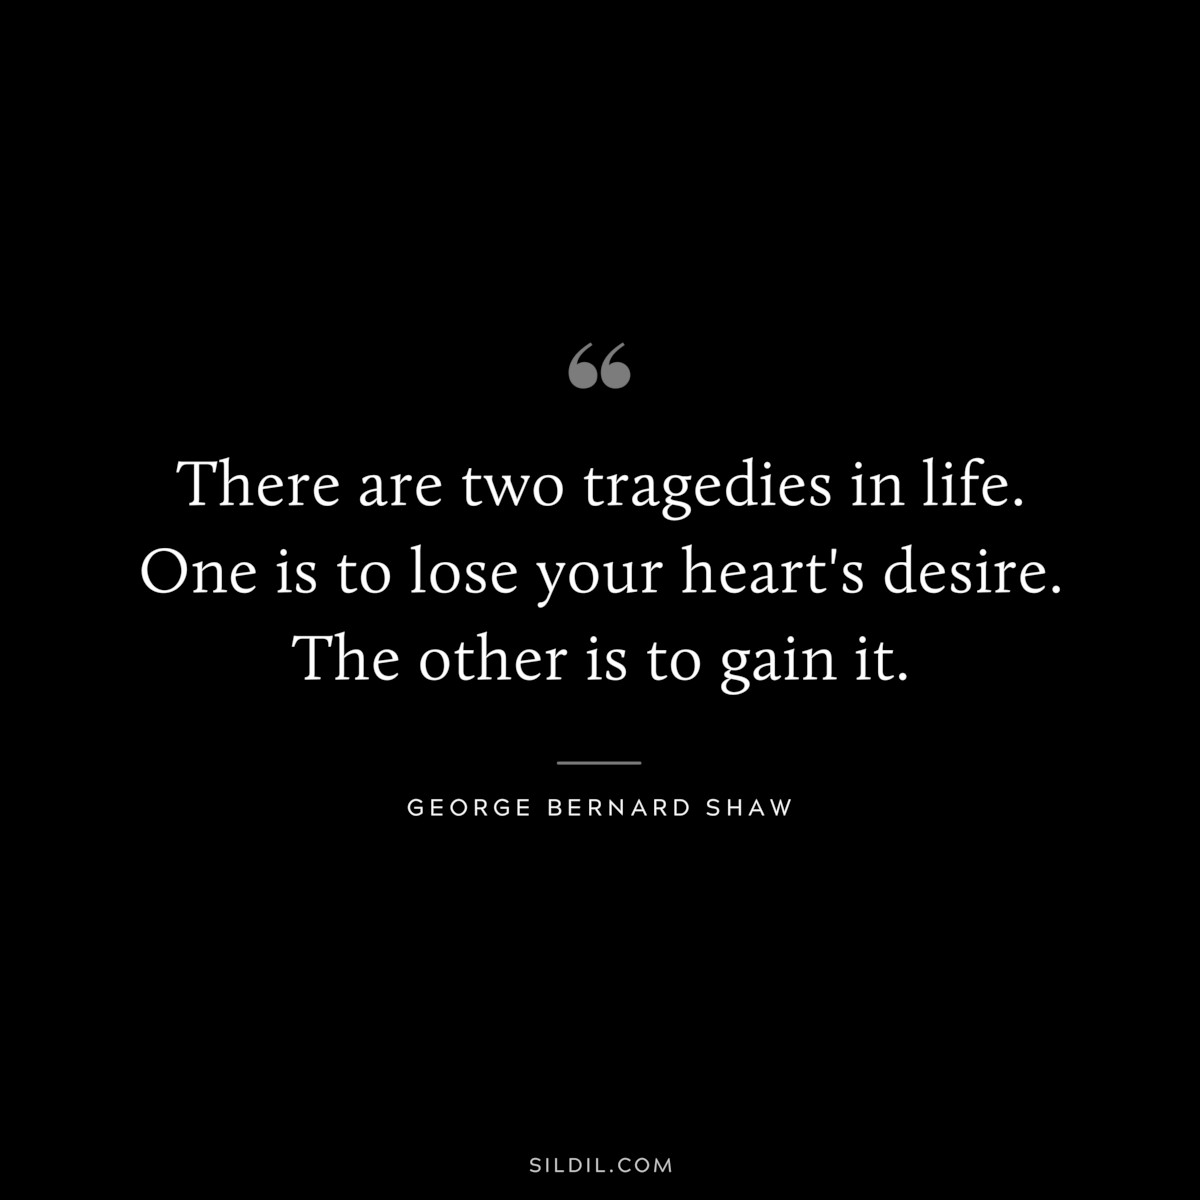 There are two tragedies in life. One is to lose your heart's desire. The other is to gain it. ― George Bernard Shaw